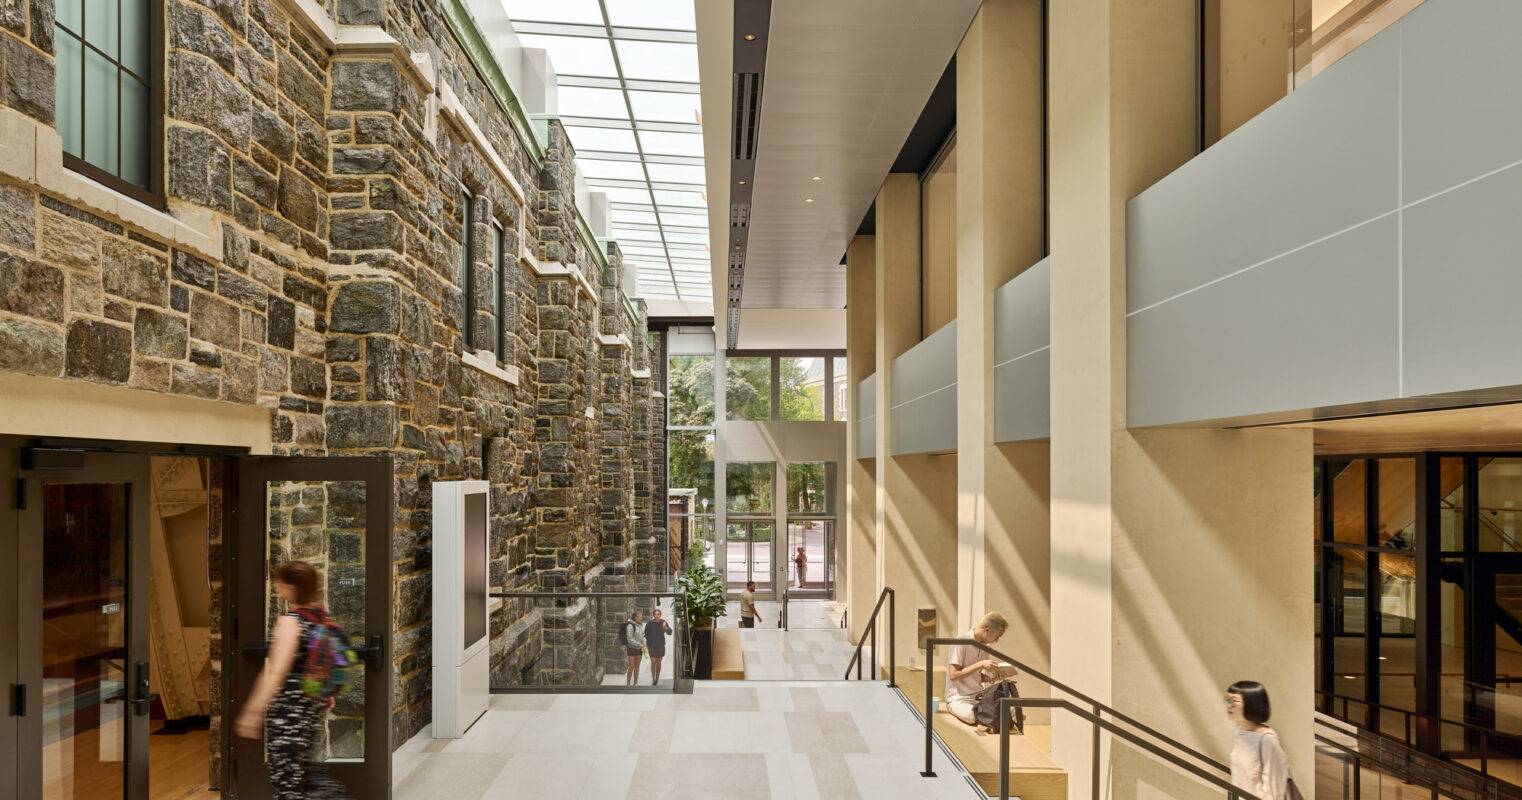 Spacious atrium with high ceilings, natural stone walls, and large floor-to-ceiling windows bathing the interior in natural light. The sleek metal balustrades contrast with the warm stone, enhancing the modern yet timeless aesthetic. White tiles in a grid pattern cover the floor, complementing the building's geometric lines.